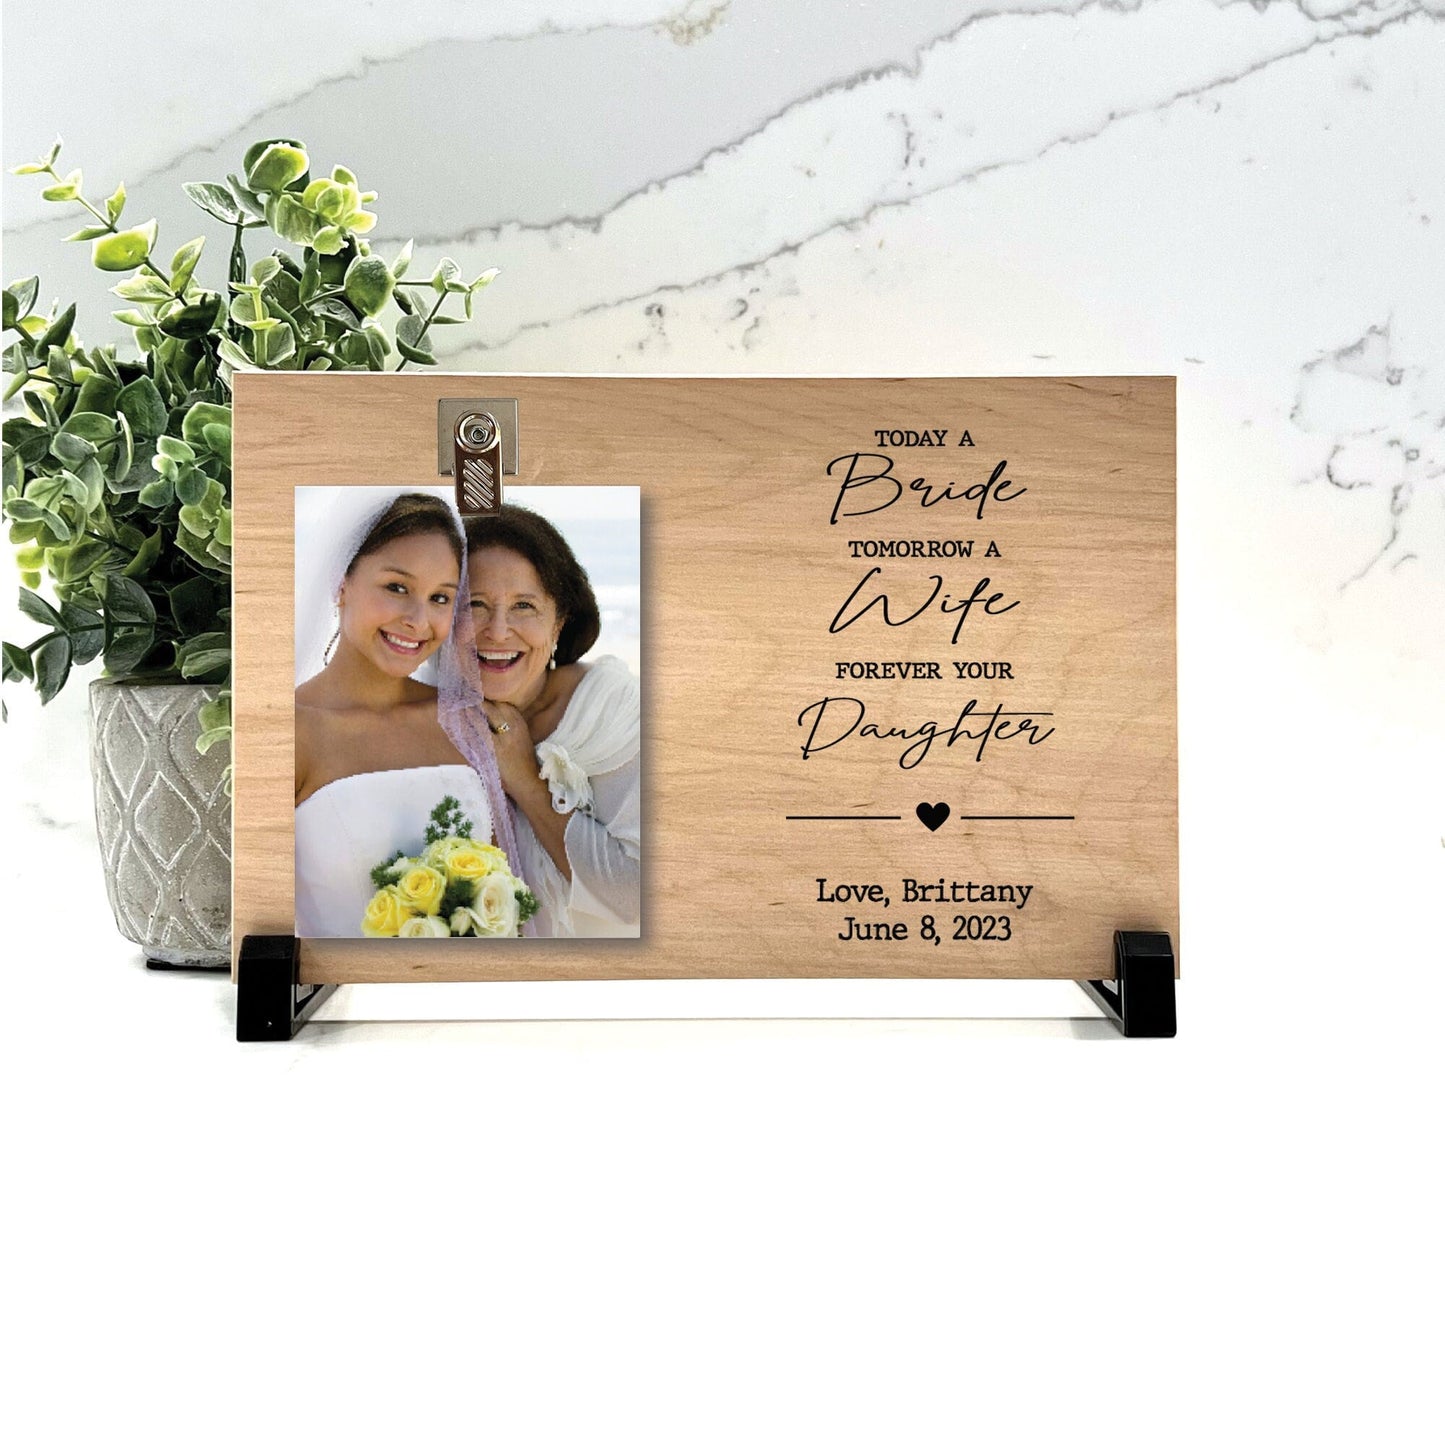 Today a Bride Tomorrow a Wife Forever your Daughter- gift frame for Mother of the Bride - Bride gift to mother - Background Choice